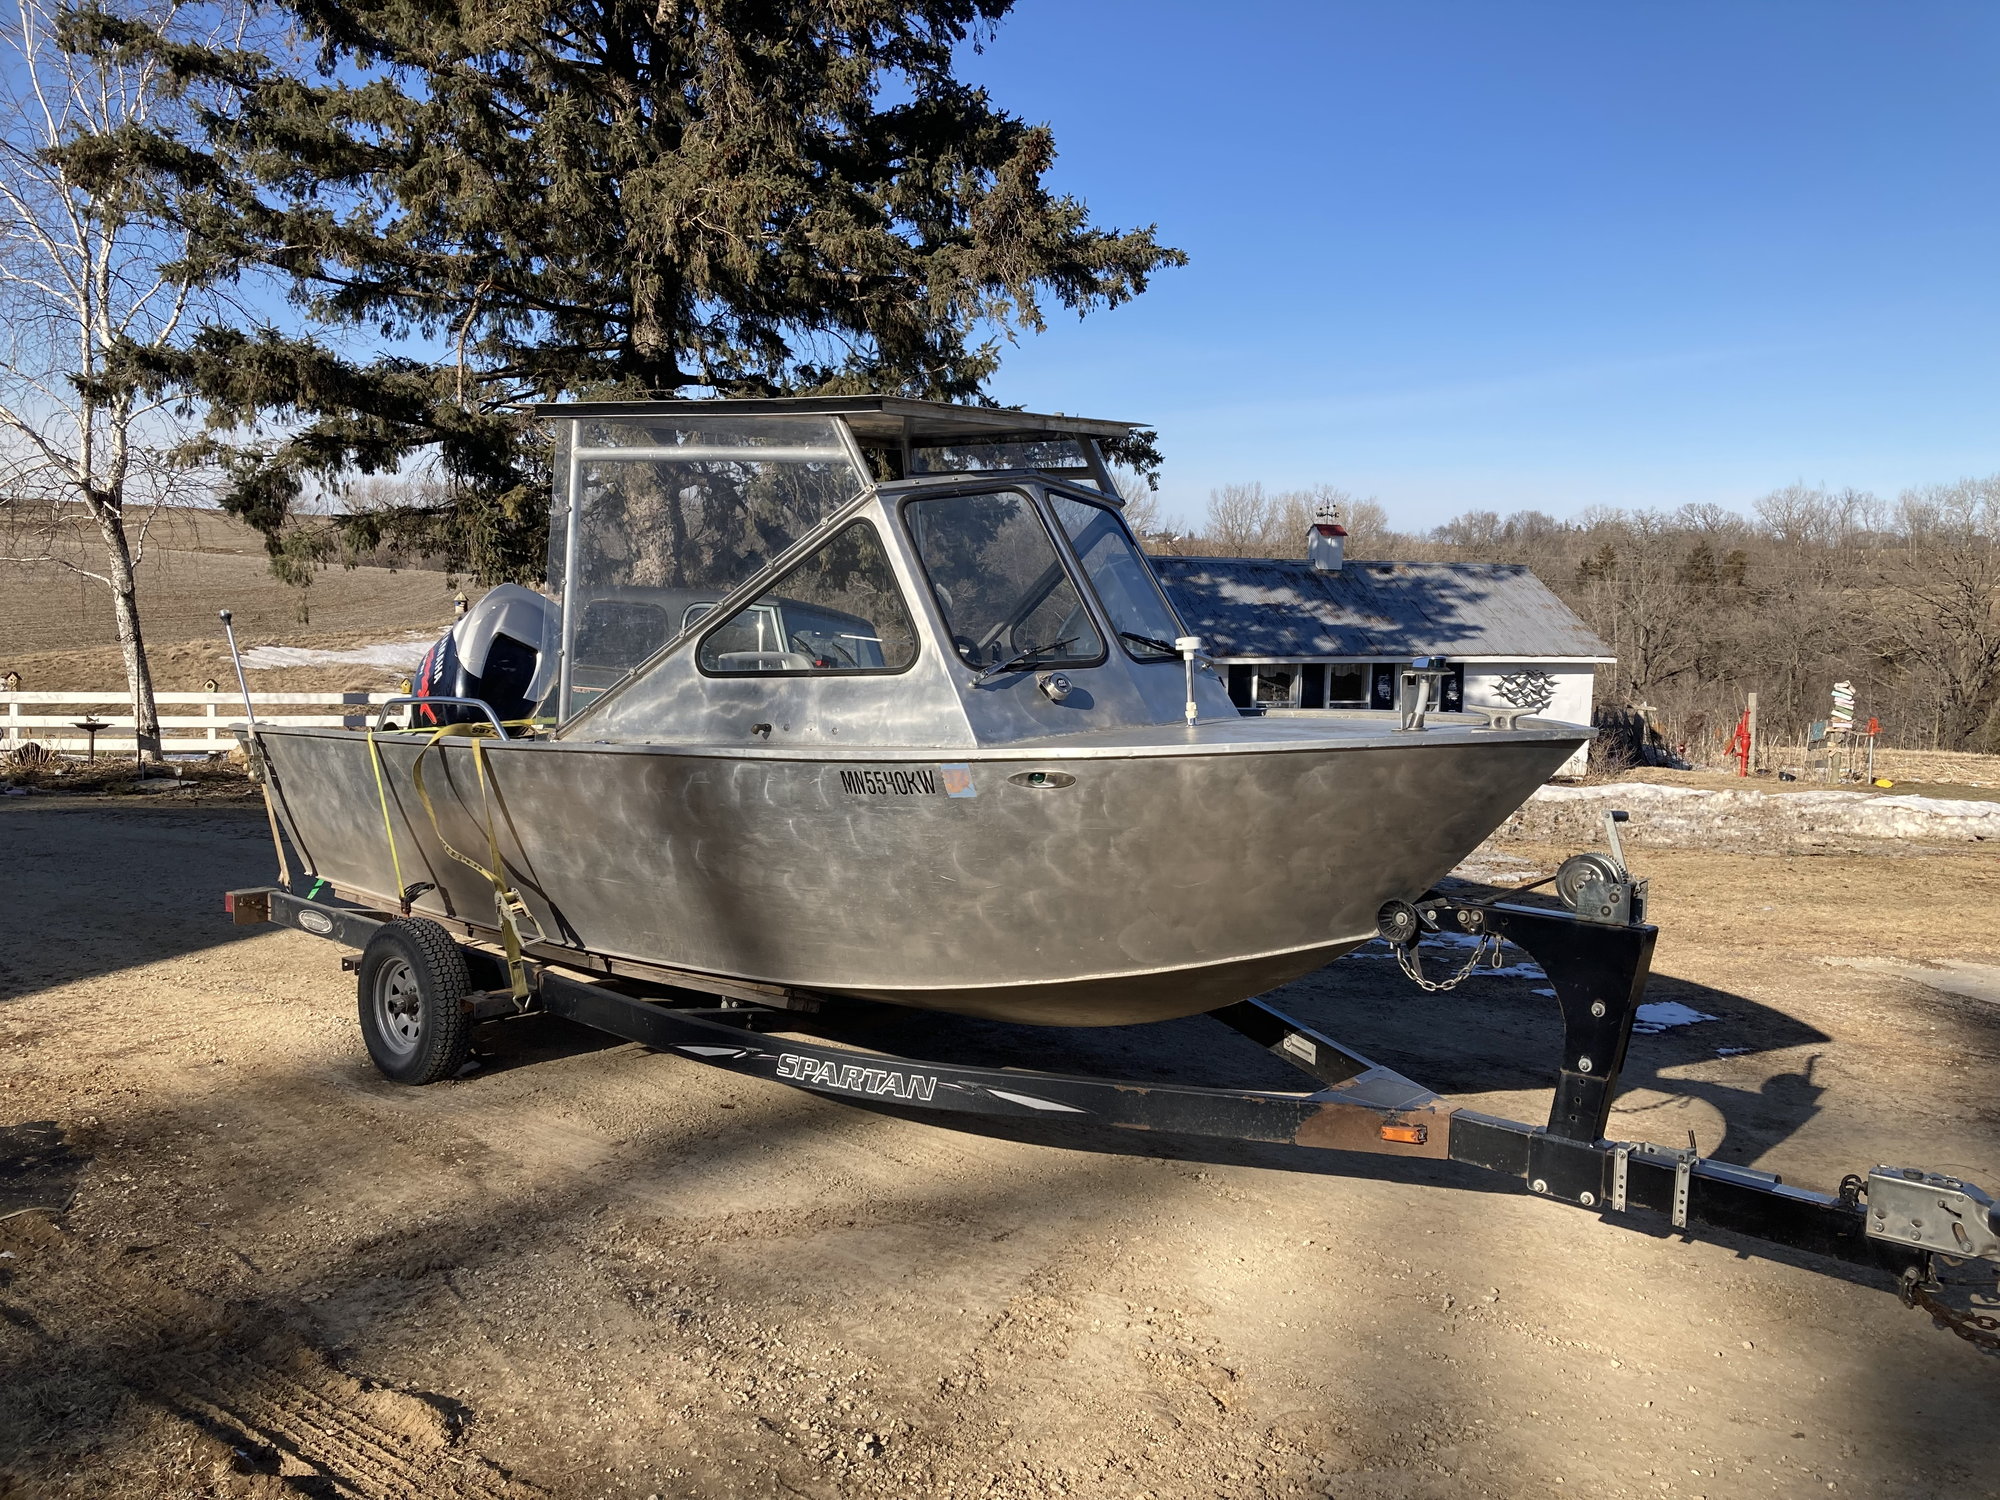 Craigslist Budget Pilothouse Build - The Hull Truth - Boating and